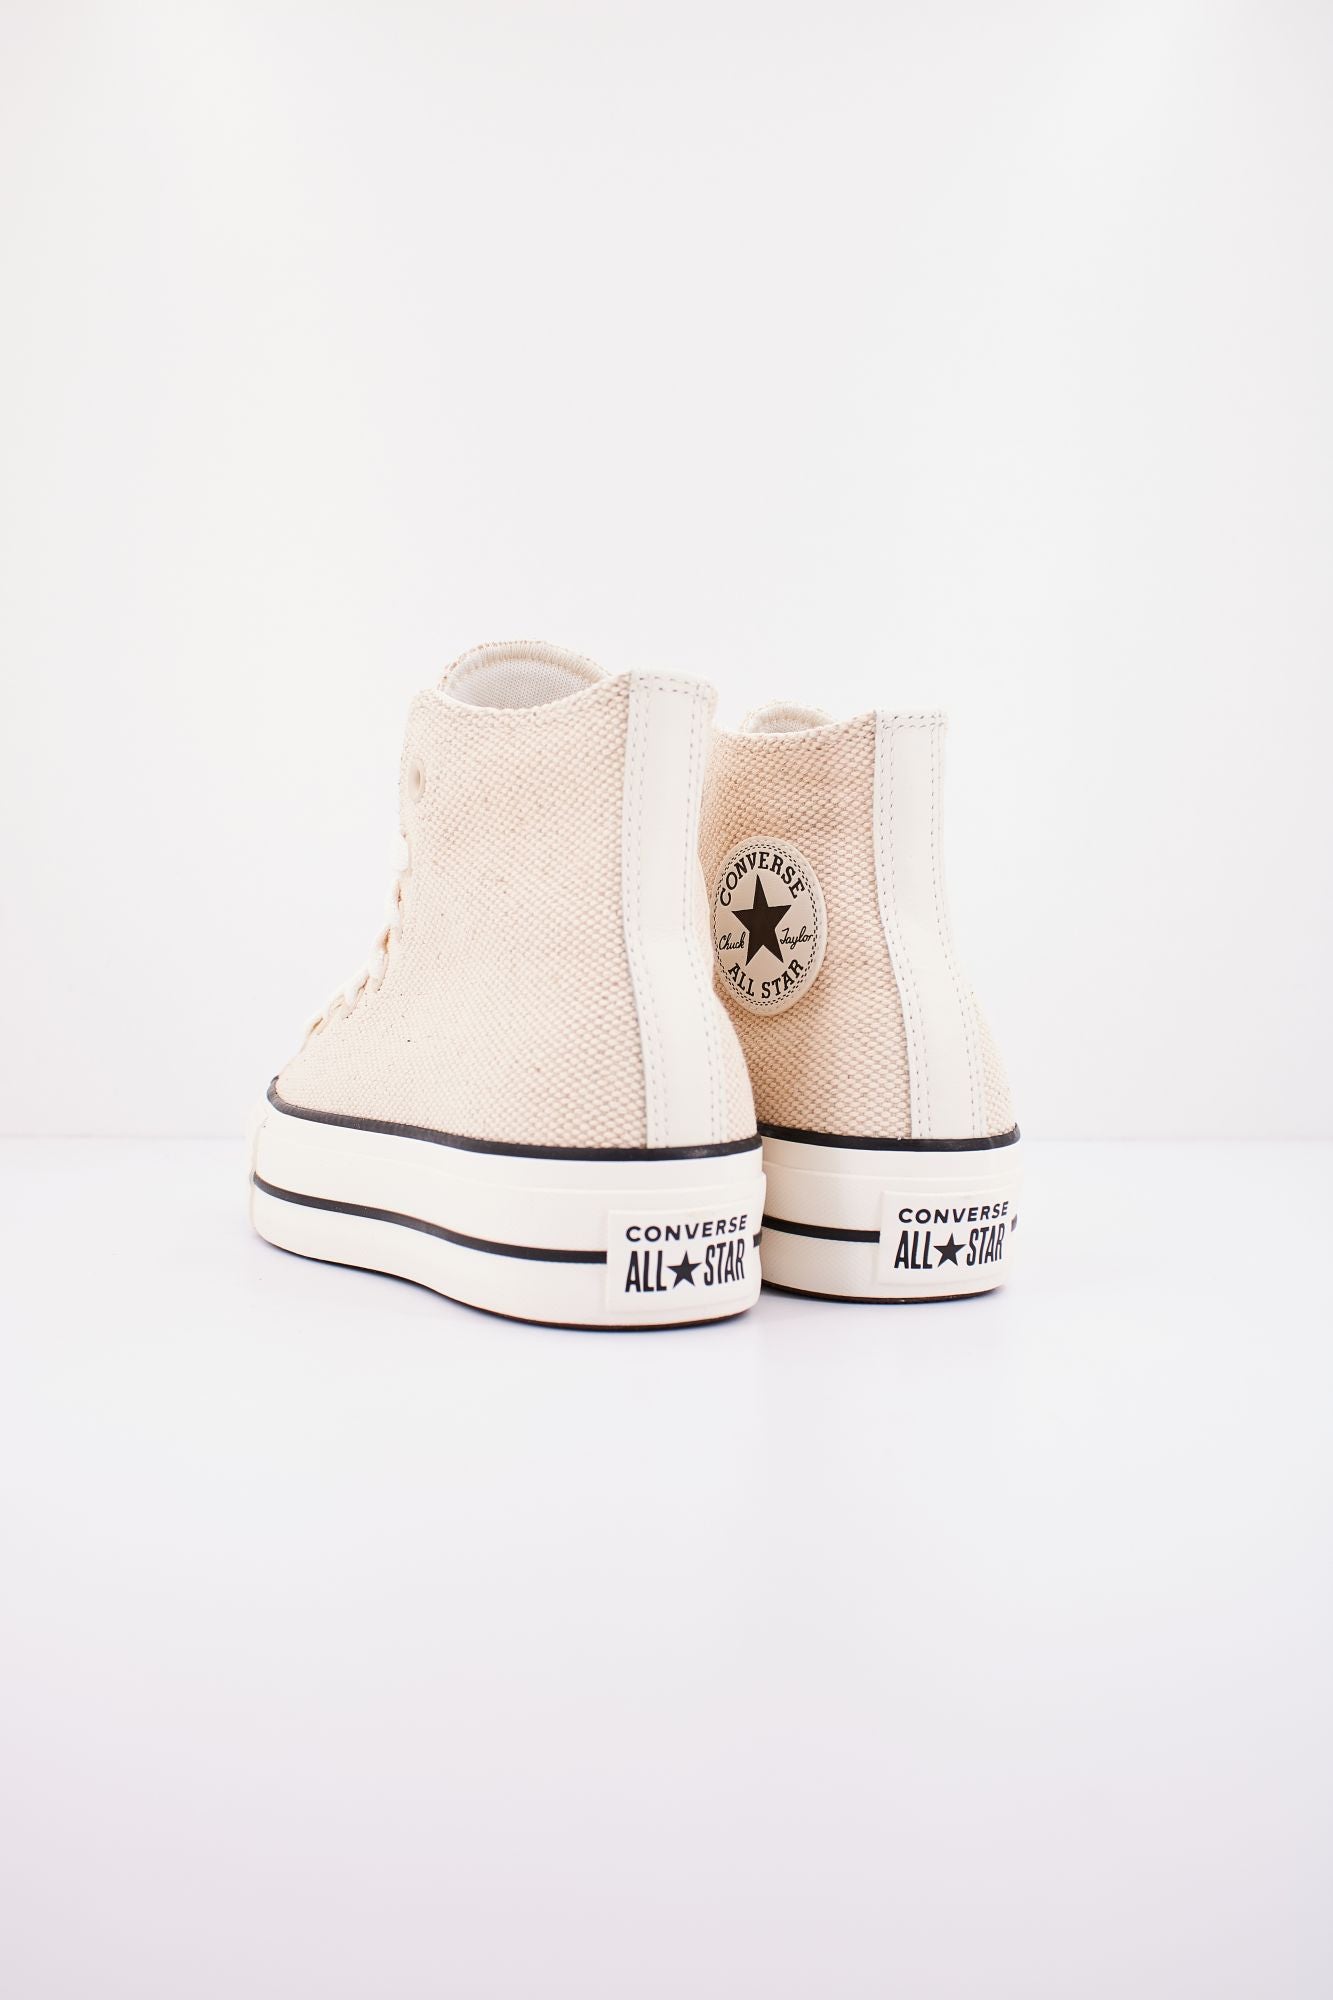 CONVERSE CHUCK TAYLOR ALL LIFT CANVAS & LEATHER en color BEIS (3)